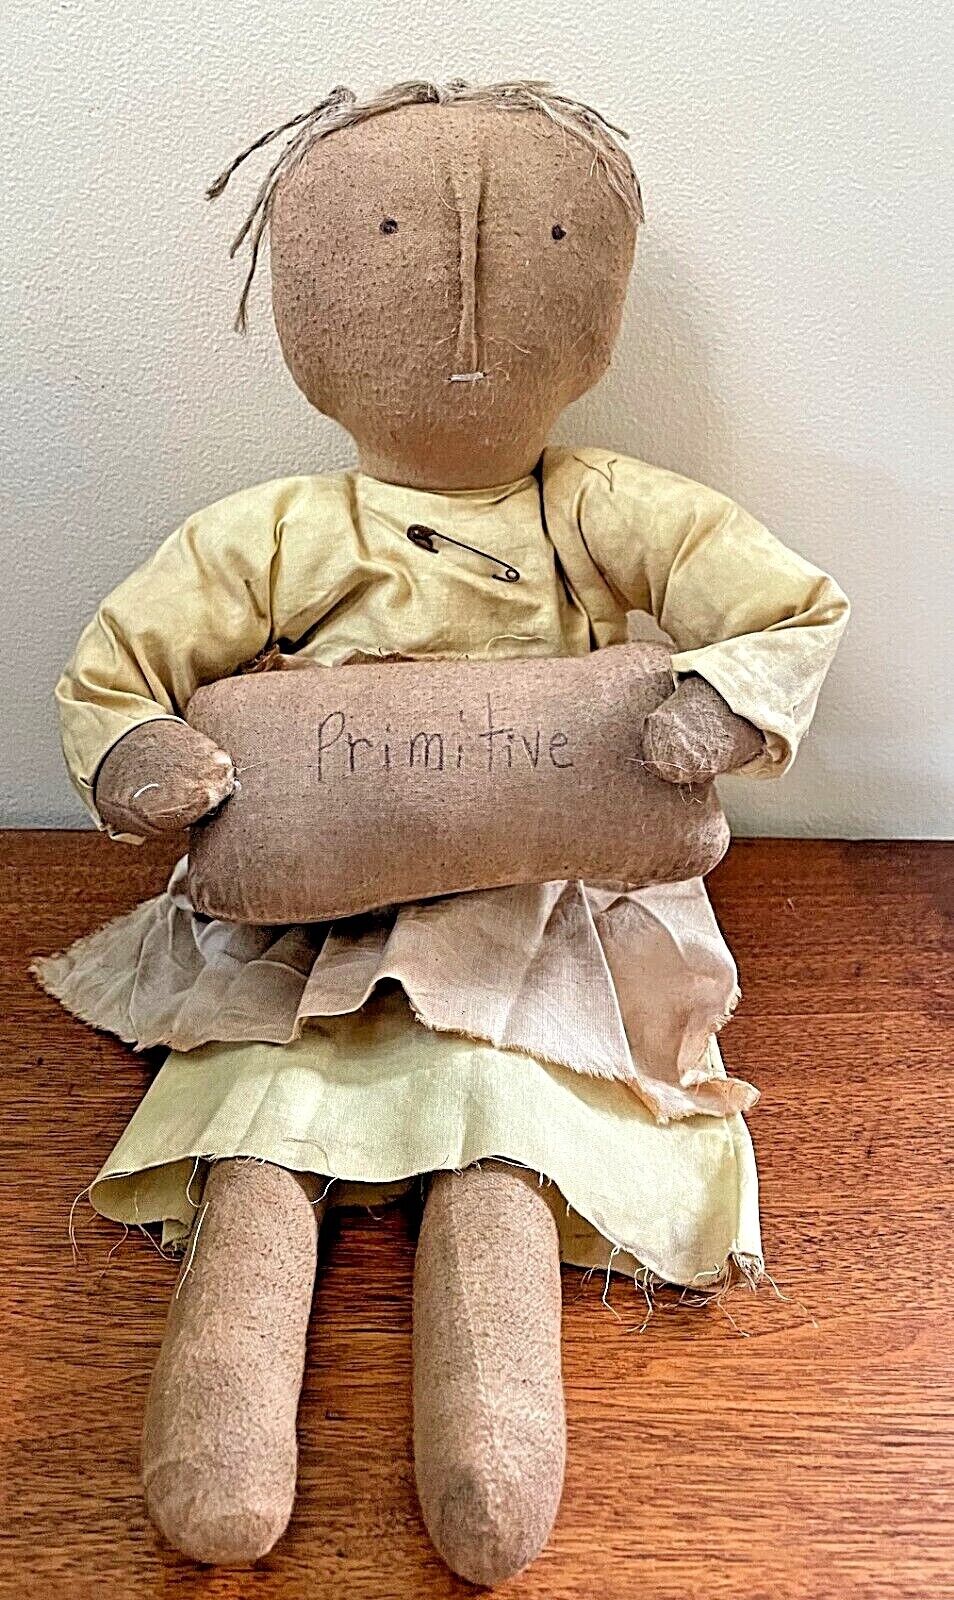 Primitive Handcrafted Folk Art 18&quot; Colonial Doll w/ Pillow - The Primitive Pineapple Collection